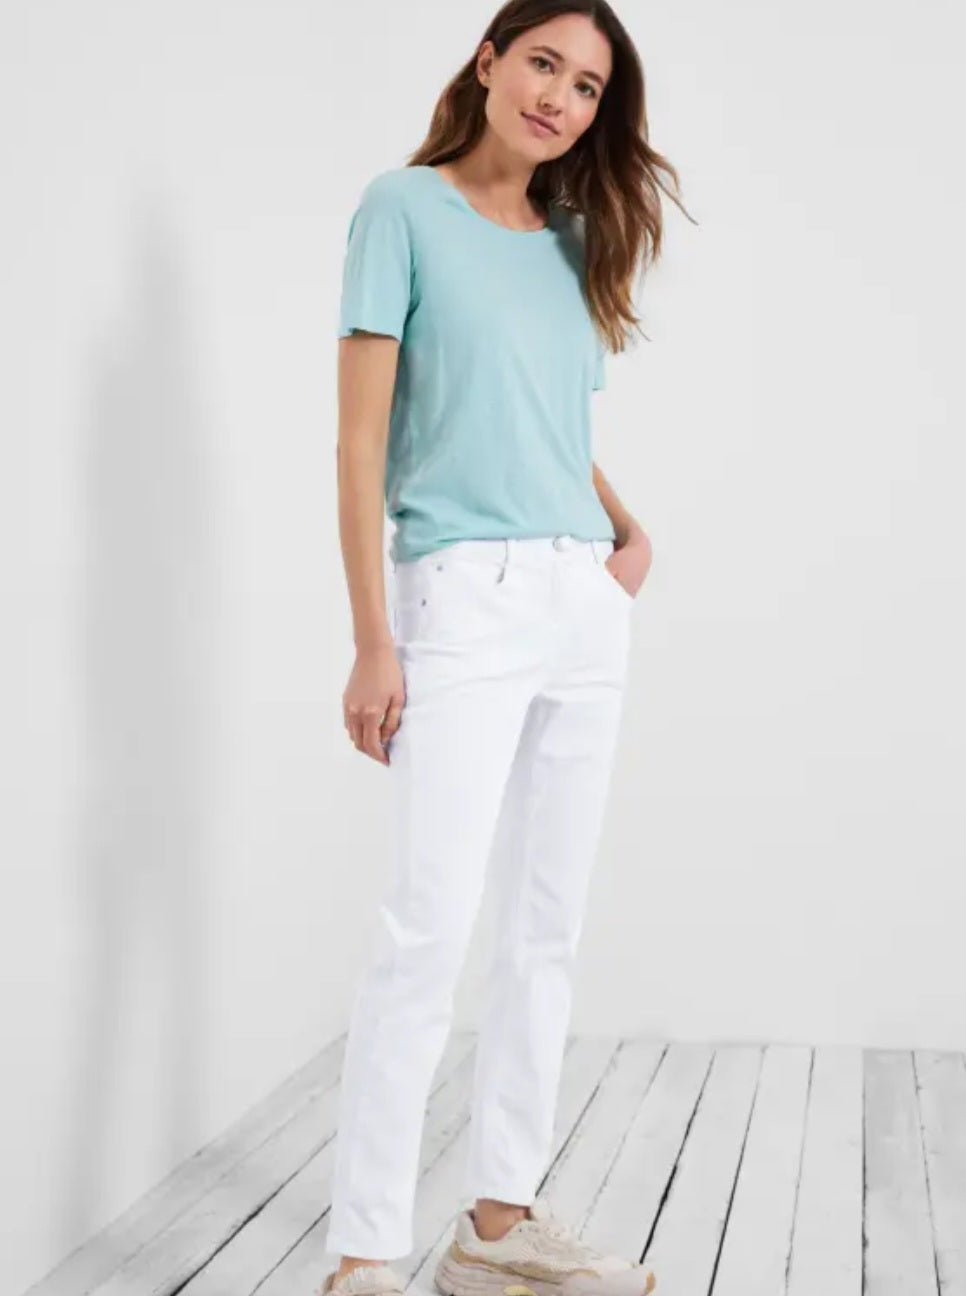 CECIL Loose Fit Jeans Style Linga(White)